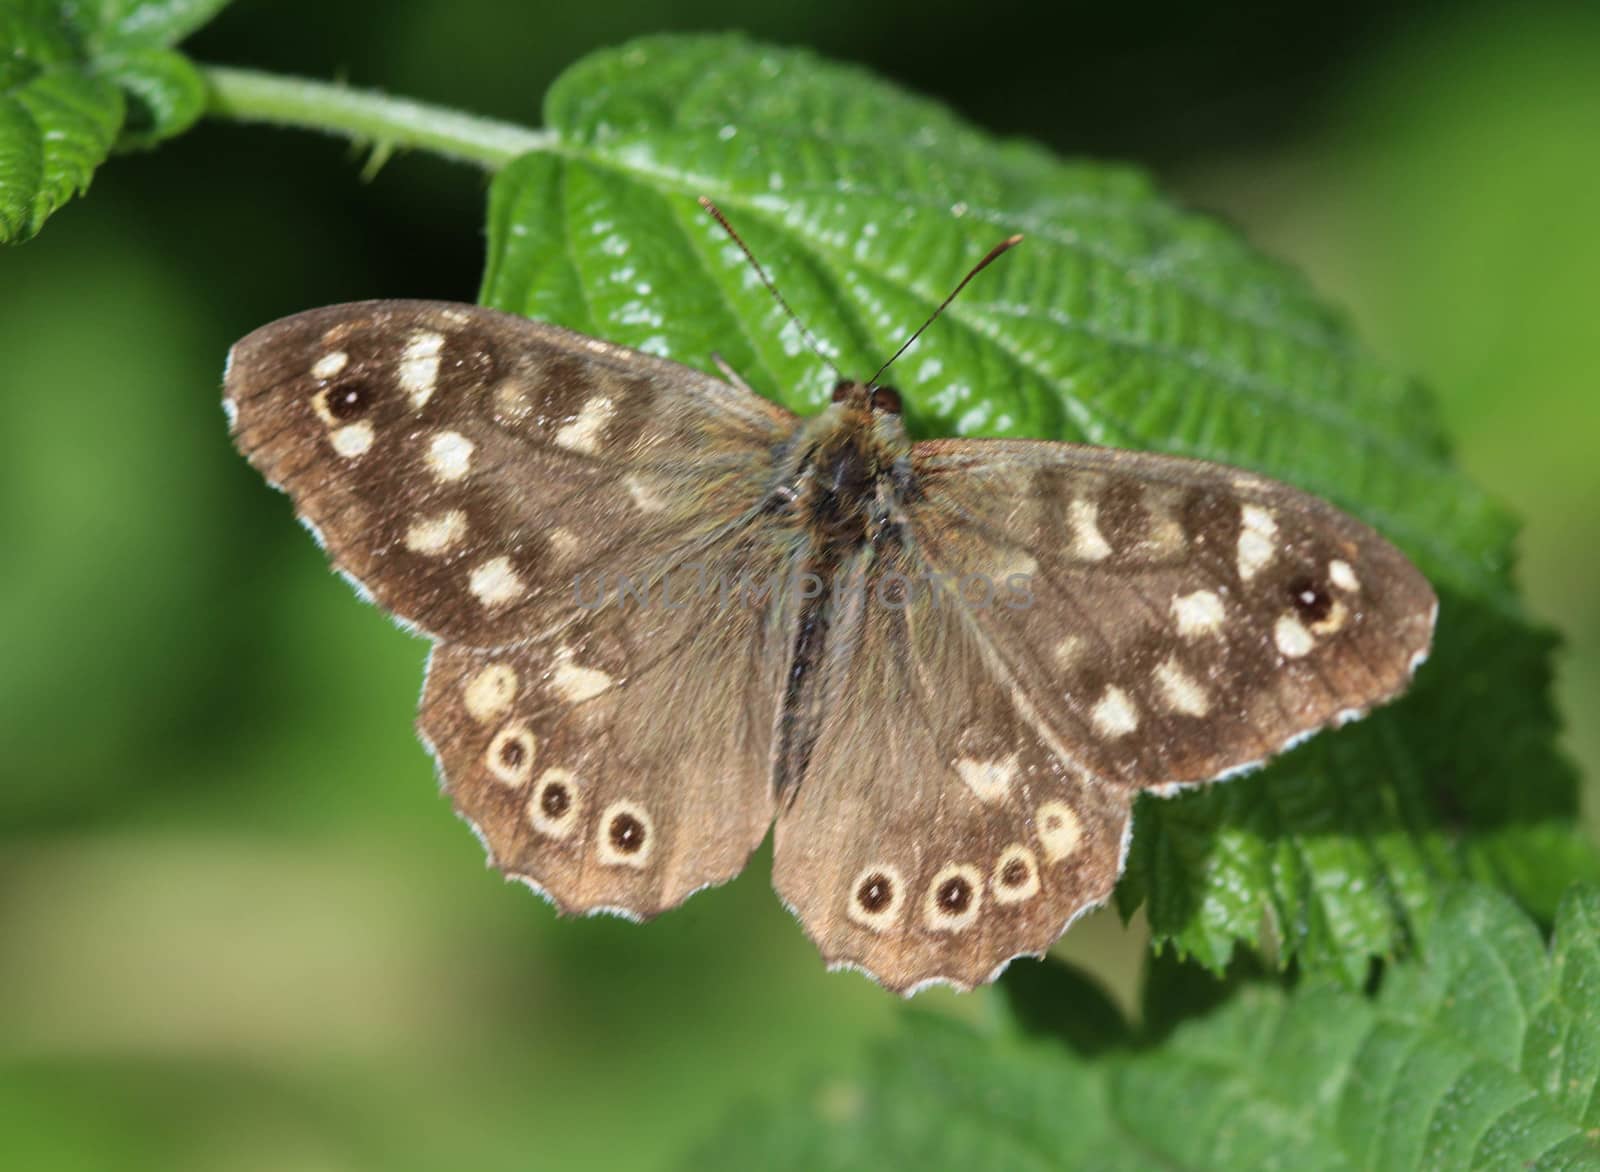 speckled wood butterfly (Pararge aegeria), sitting on a leaf by michaelmeijer